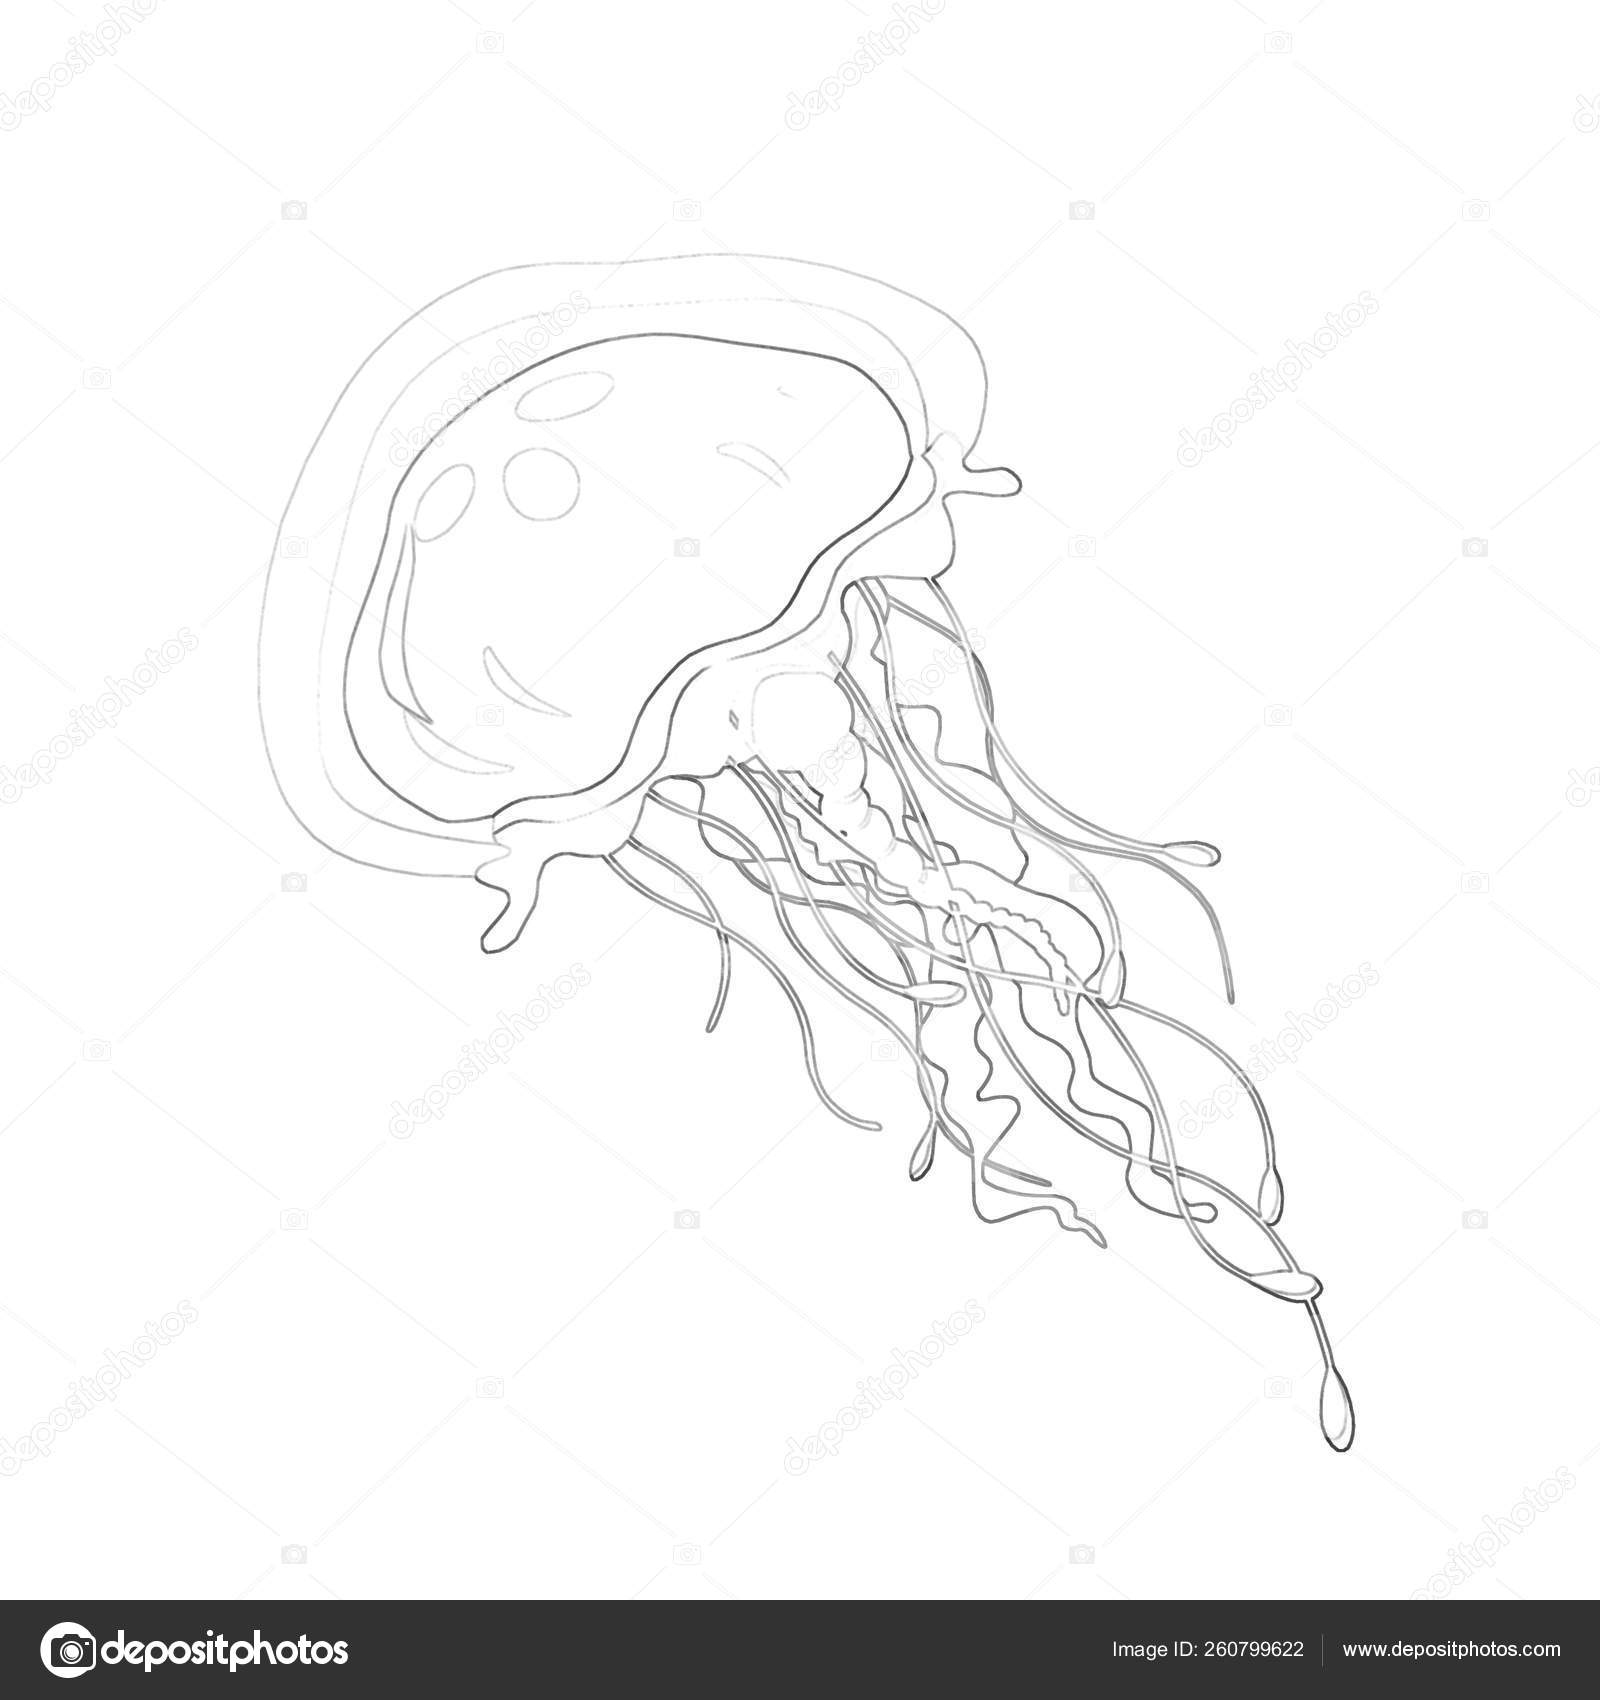 Illustration Coloring Book Series Jellyfish Soft Thin Line Print Bring Stock Photo C Yayimages 260799622